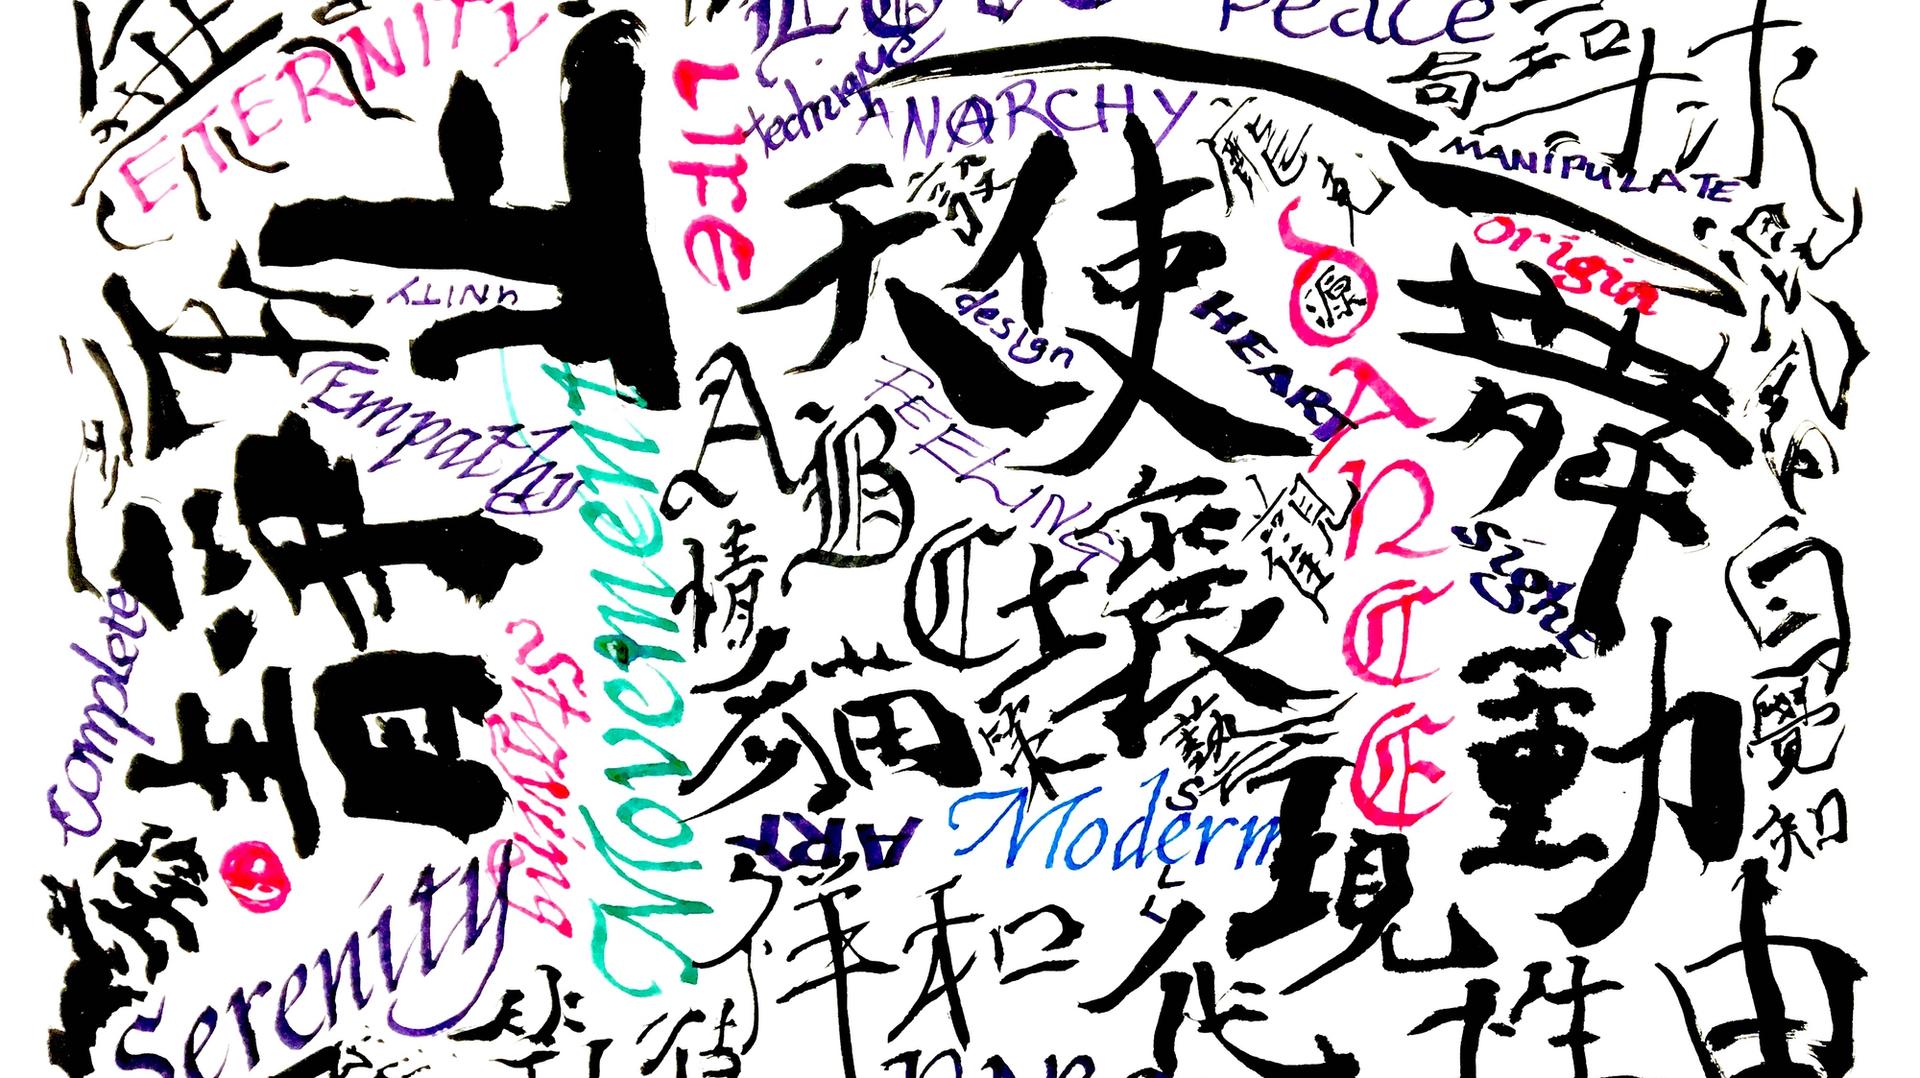 A collage of words, letters and marks in black, pink, green, blue and purple.